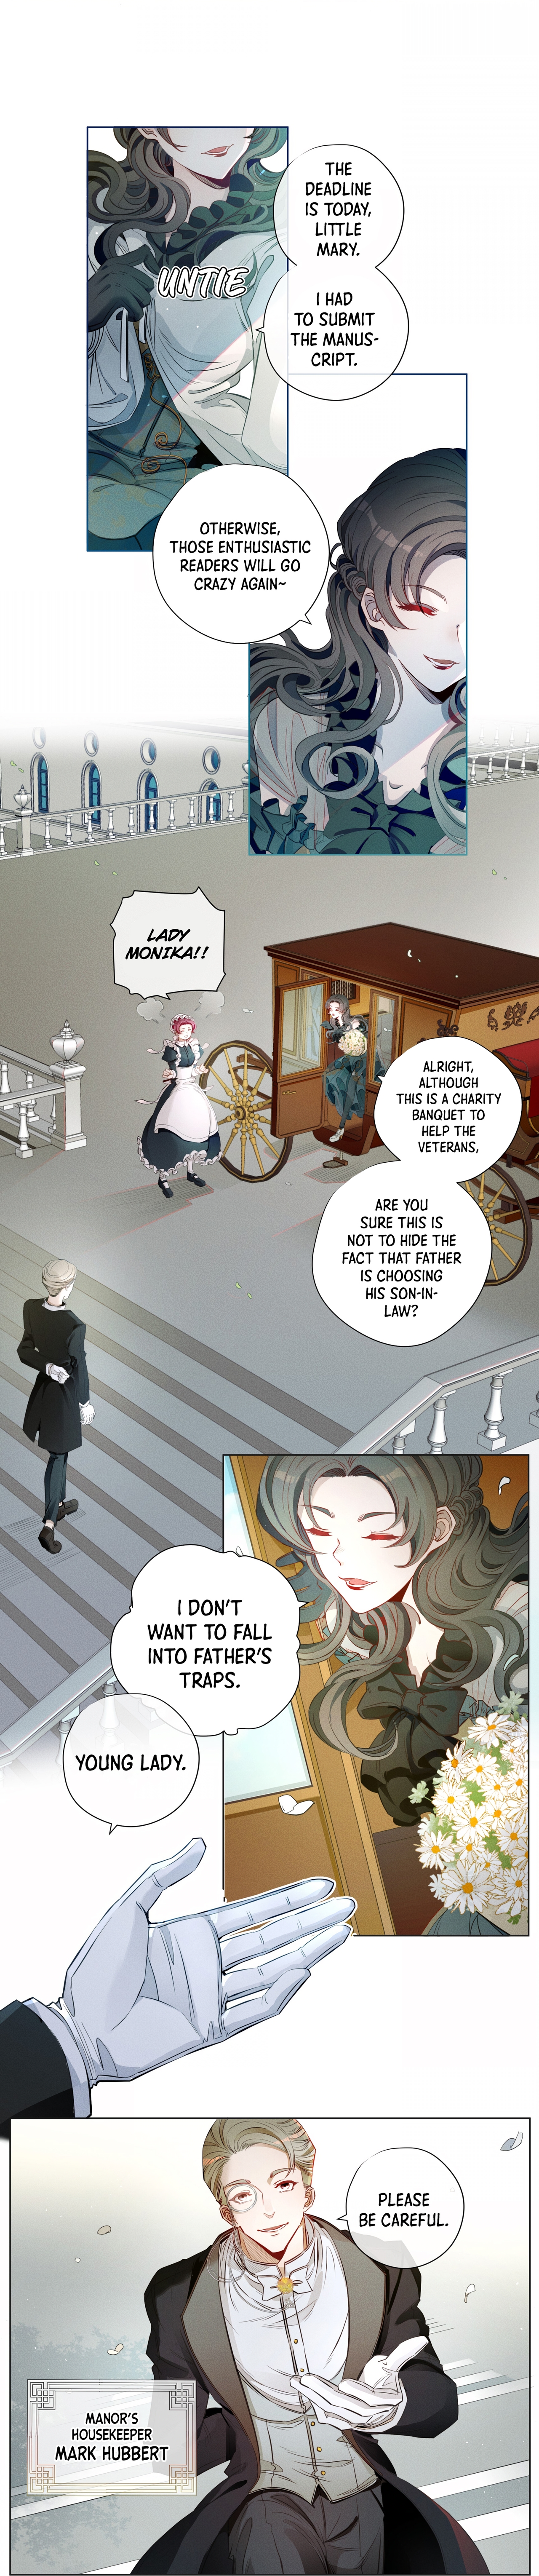 The Death Of Baron Werther Chapter 1 - Page 9